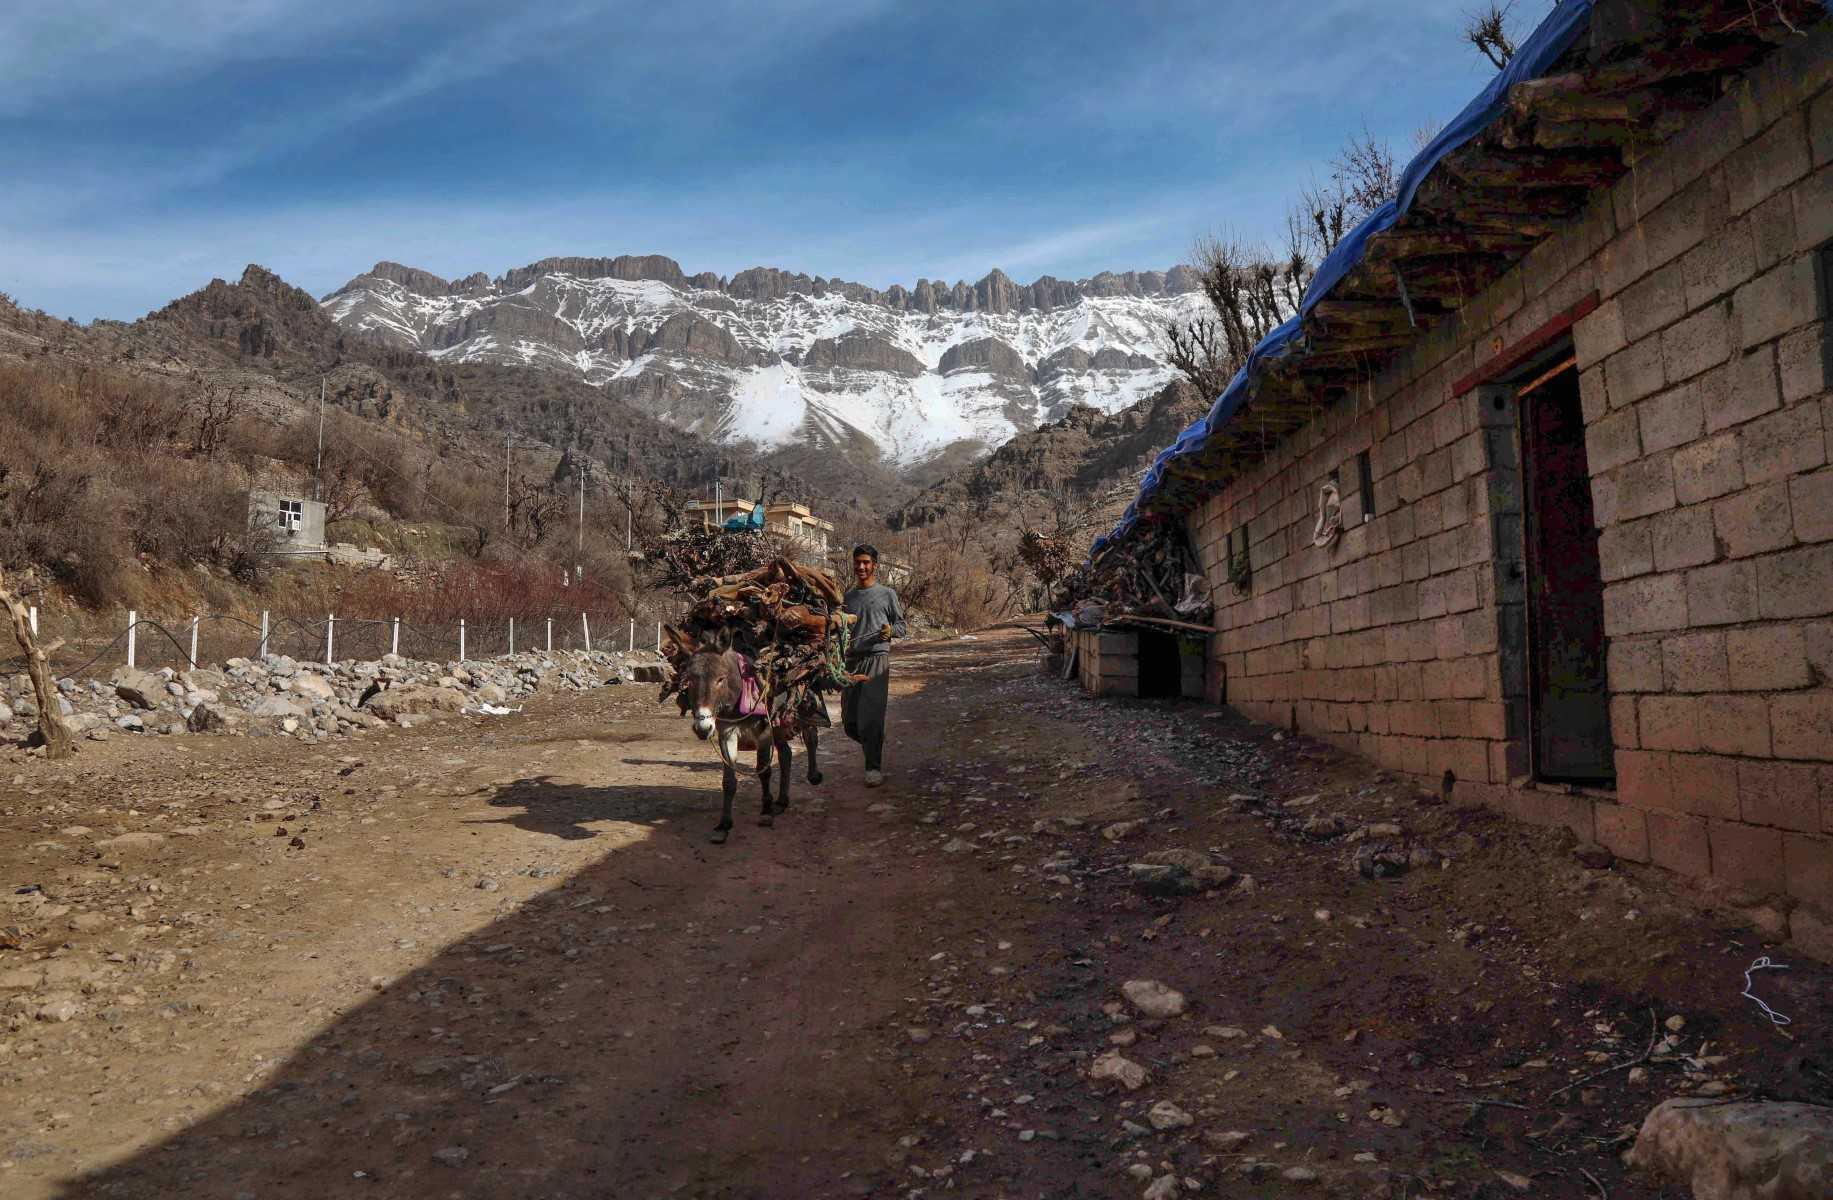 An Iraqi Kurdish man walks with a mule loaded with firewood on its back in the village of Sarkapkan, on Jan 27, 2021. Photo: AFP 